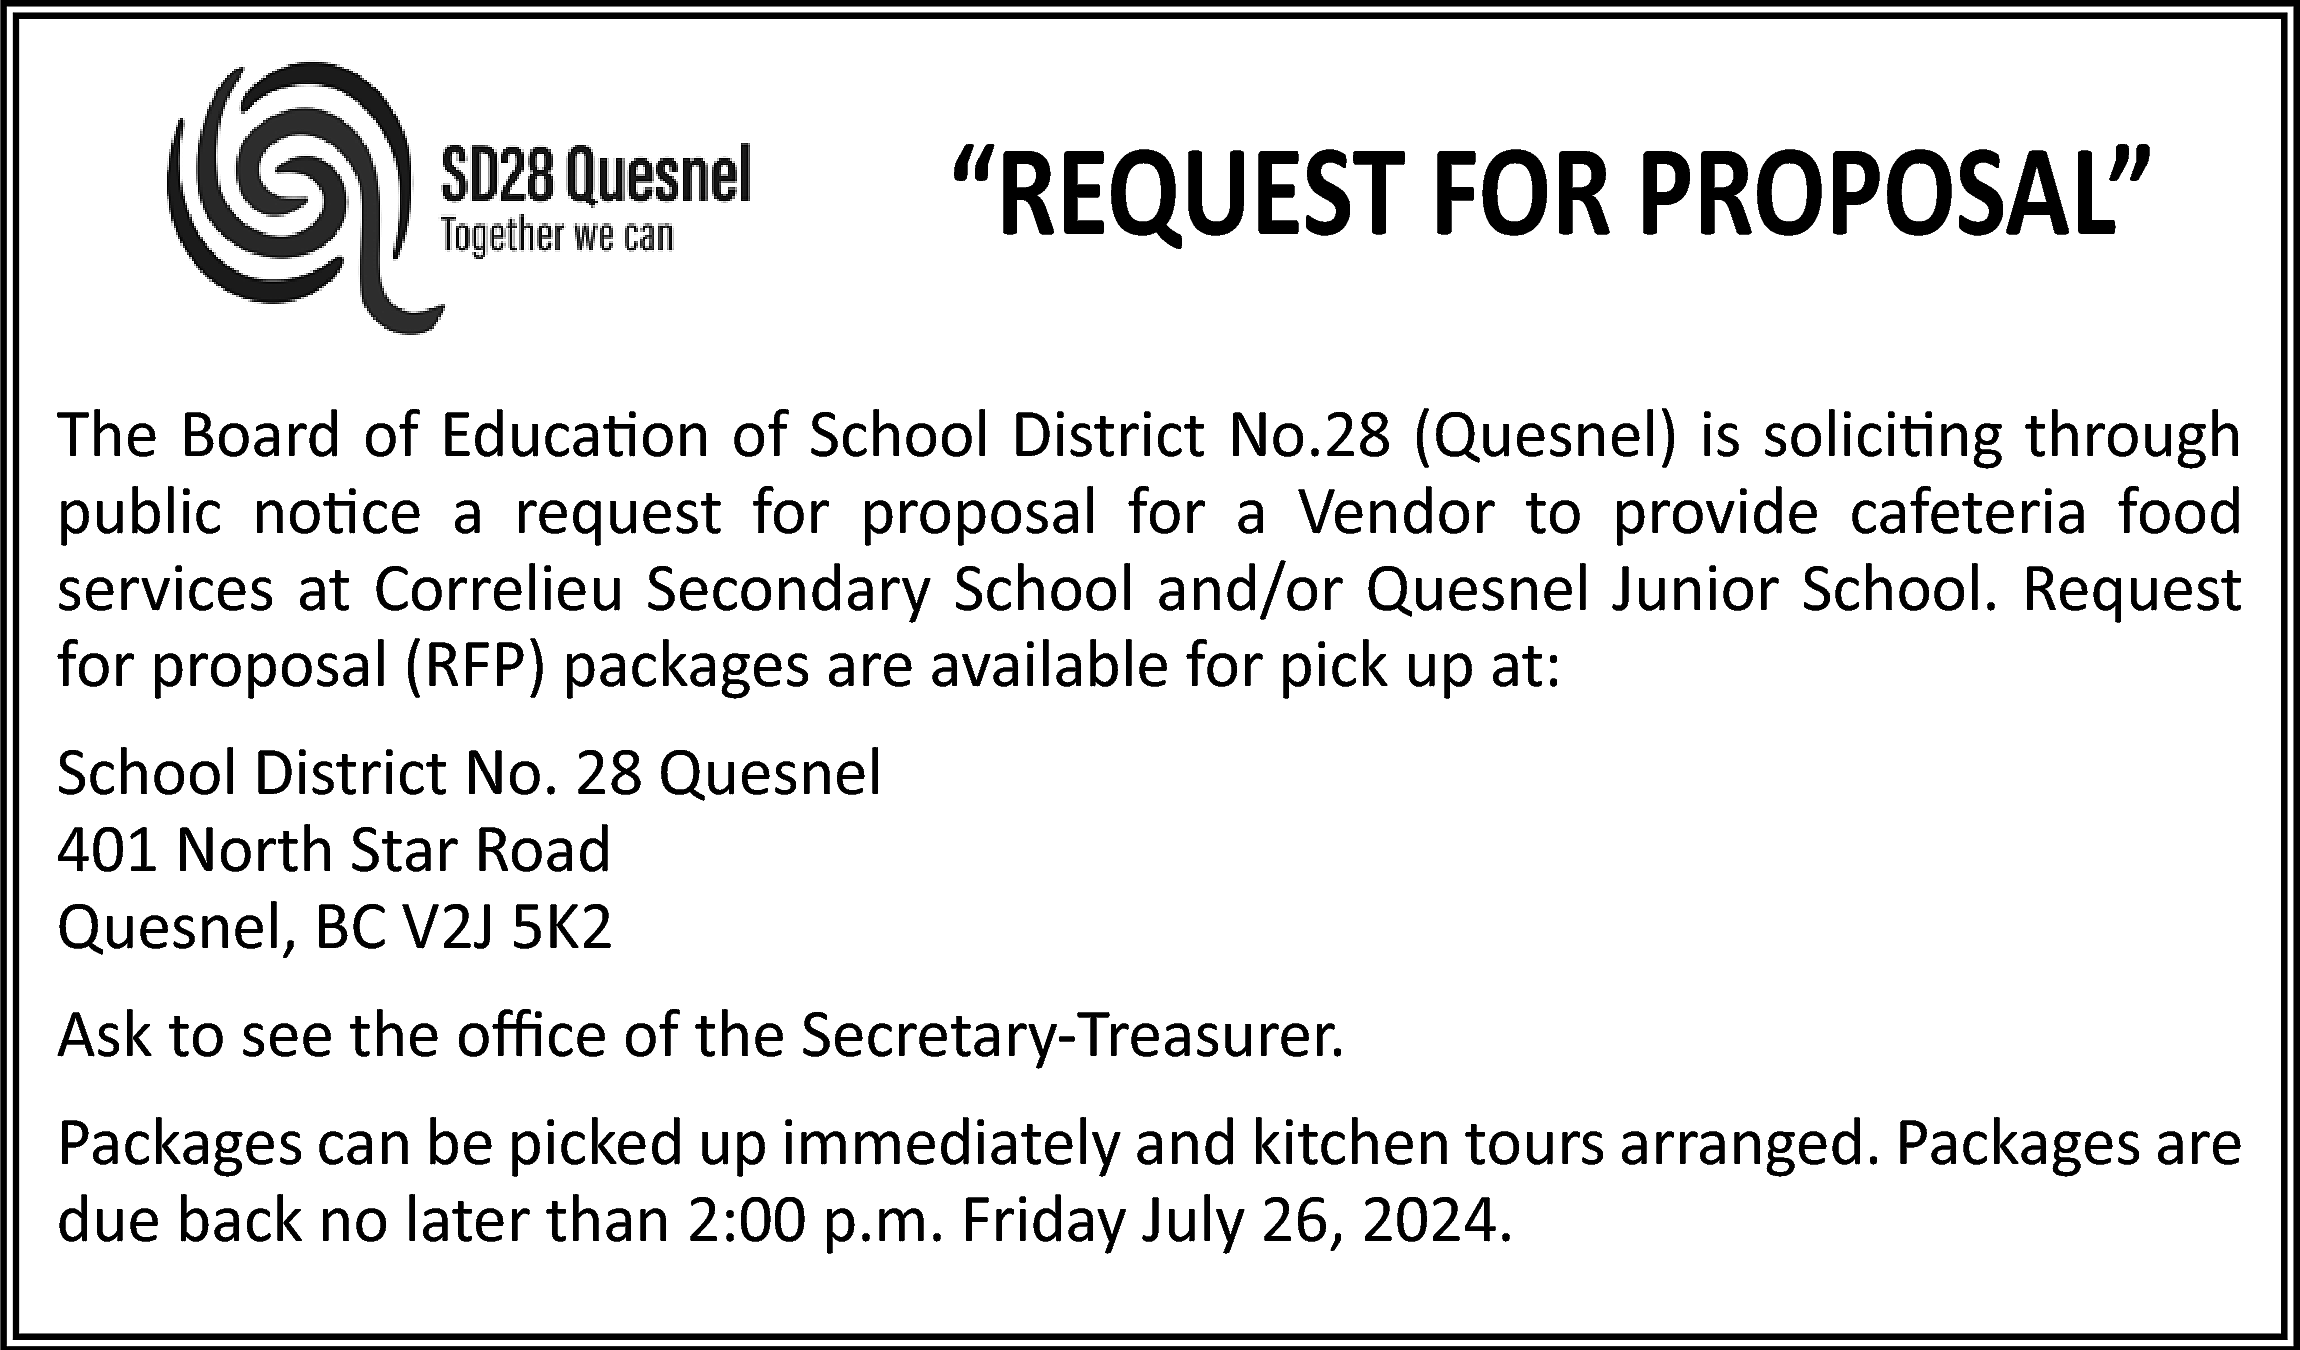 “REQUEST FOR PROPOSAL” <br>The Board  “REQUEST FOR PROPOSAL”  The Board of Education of School District No.28 (Quesnel) is soliciting through  public notice a request for proposal for a Vendor to provide cafeteria food  services at Correlieu Secondary School and/or Quesnel Junior School. Request  for proposal (RFP) packages are available for pick up at:  School District No. 28 Quesnel  401 North Star Road  Quesnel, BC V2J 5K2  Ask to see the oﬃce of the Secretary-Treasurer.  Packages can be picked up immediately and kitchen tours arranged. Packages are  due back no later than 2:00 p.m. Friday July 26, 2024.    